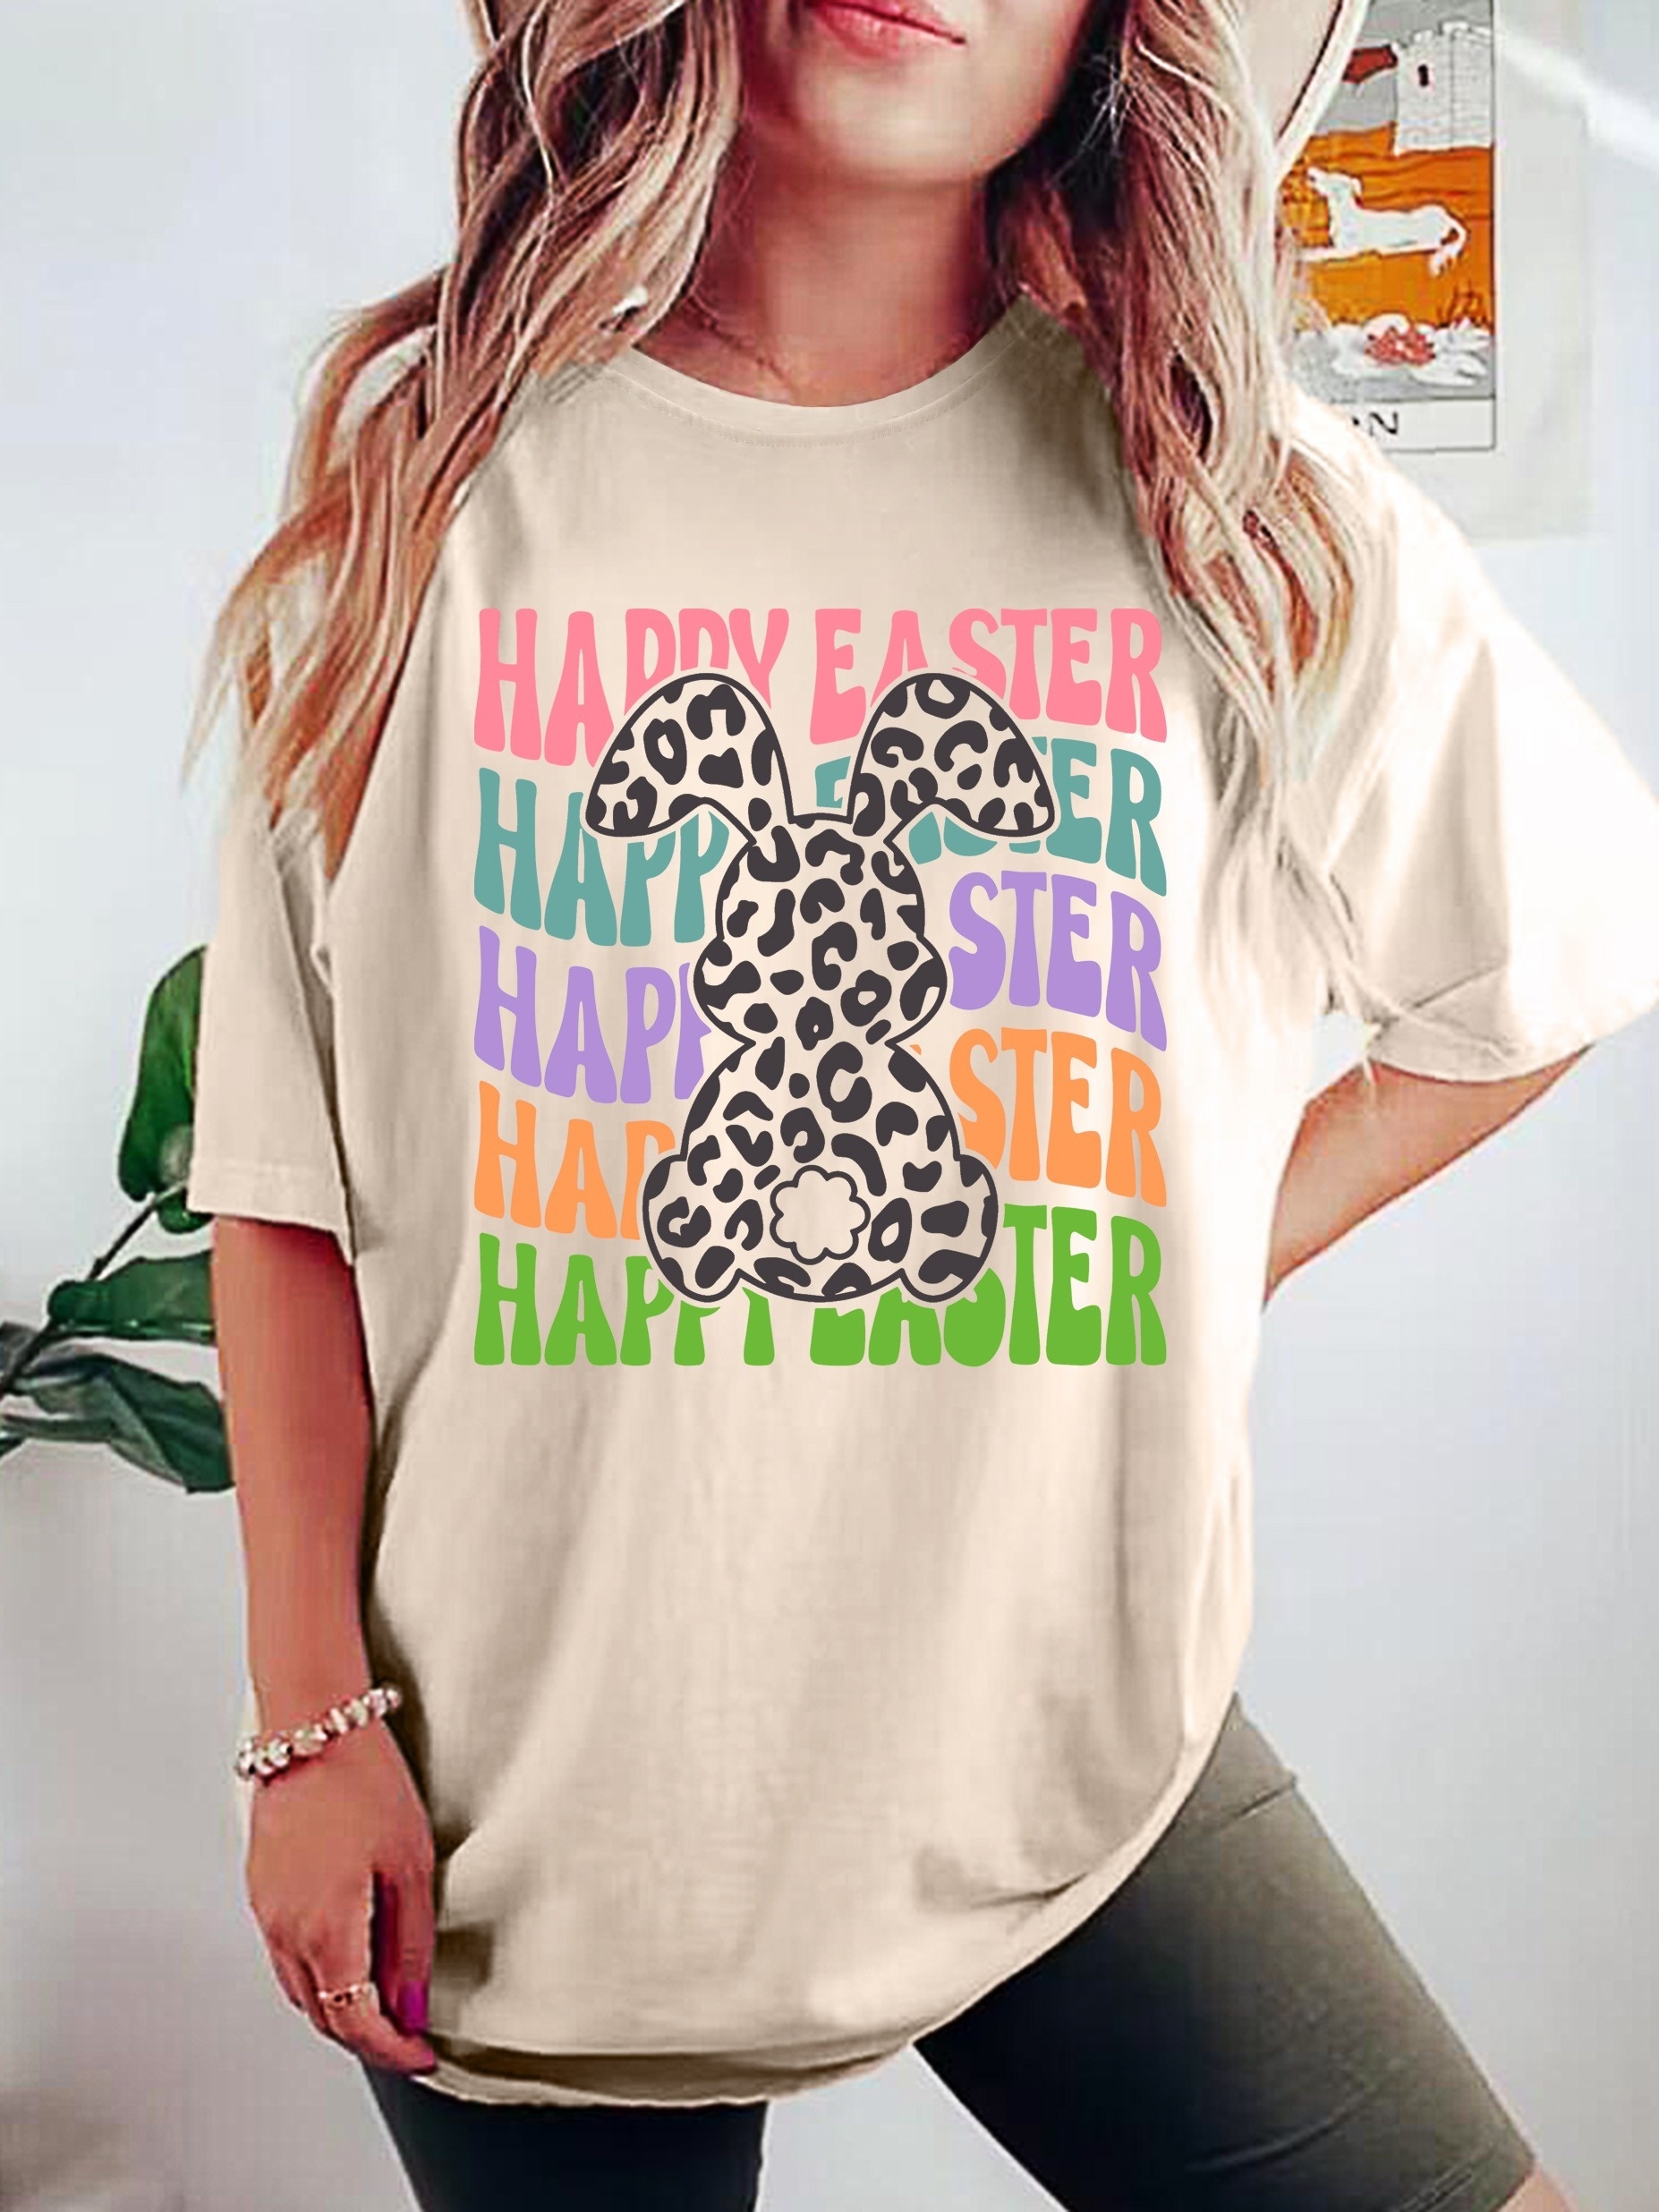  Happy Easter Shirts for Women Bunny Graphic T-Shirt Funny  Letter Printed Christian Short Sleeve Tee Tops Y2k Clothing : Sports &  Outdoors